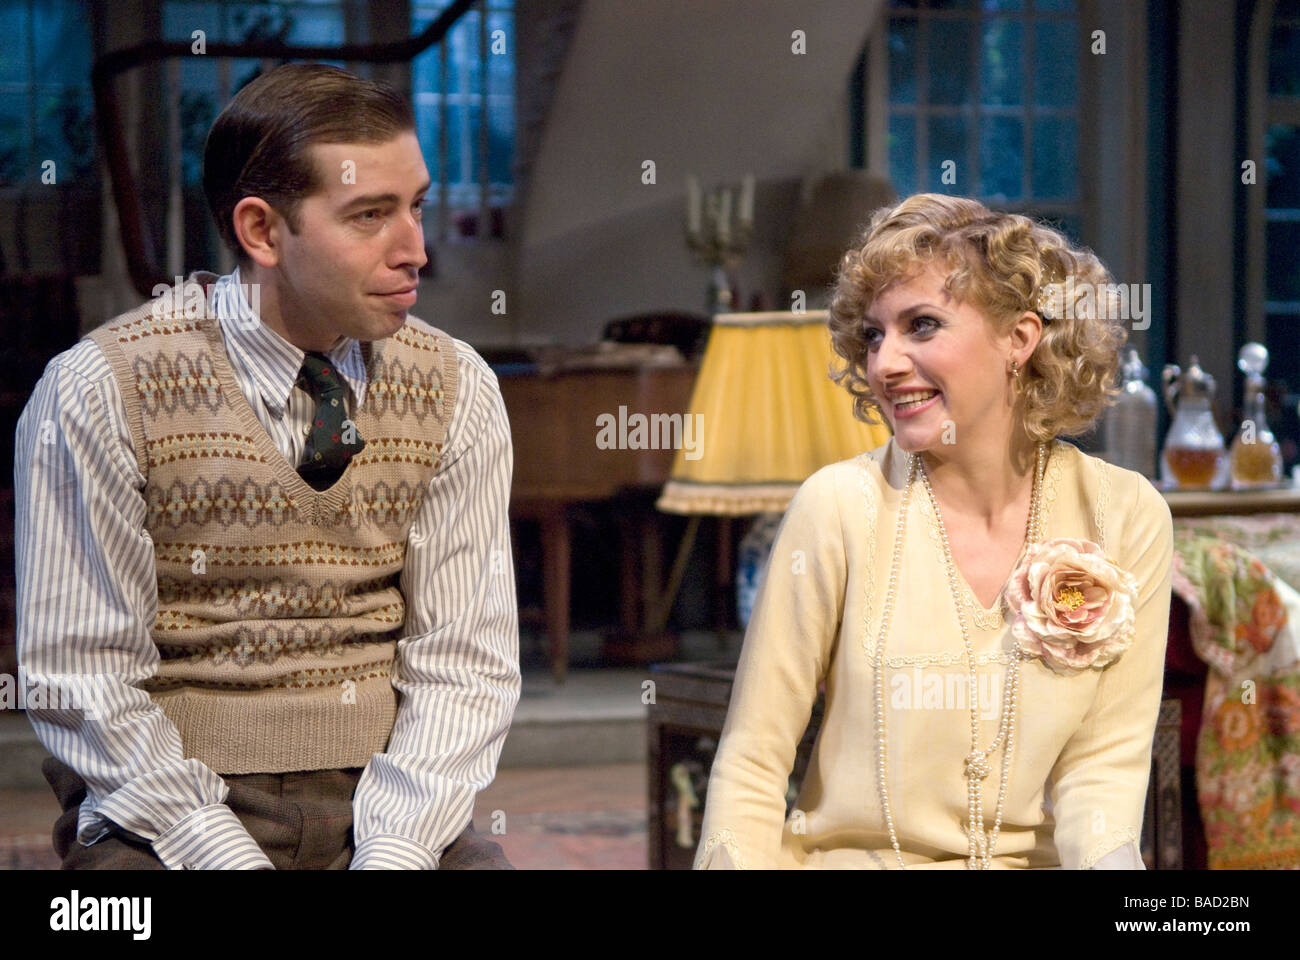 Scene from the play Hay Fever by Noel Coward, Chichester Festival Theatre, UK, April 2009. Stock Photo